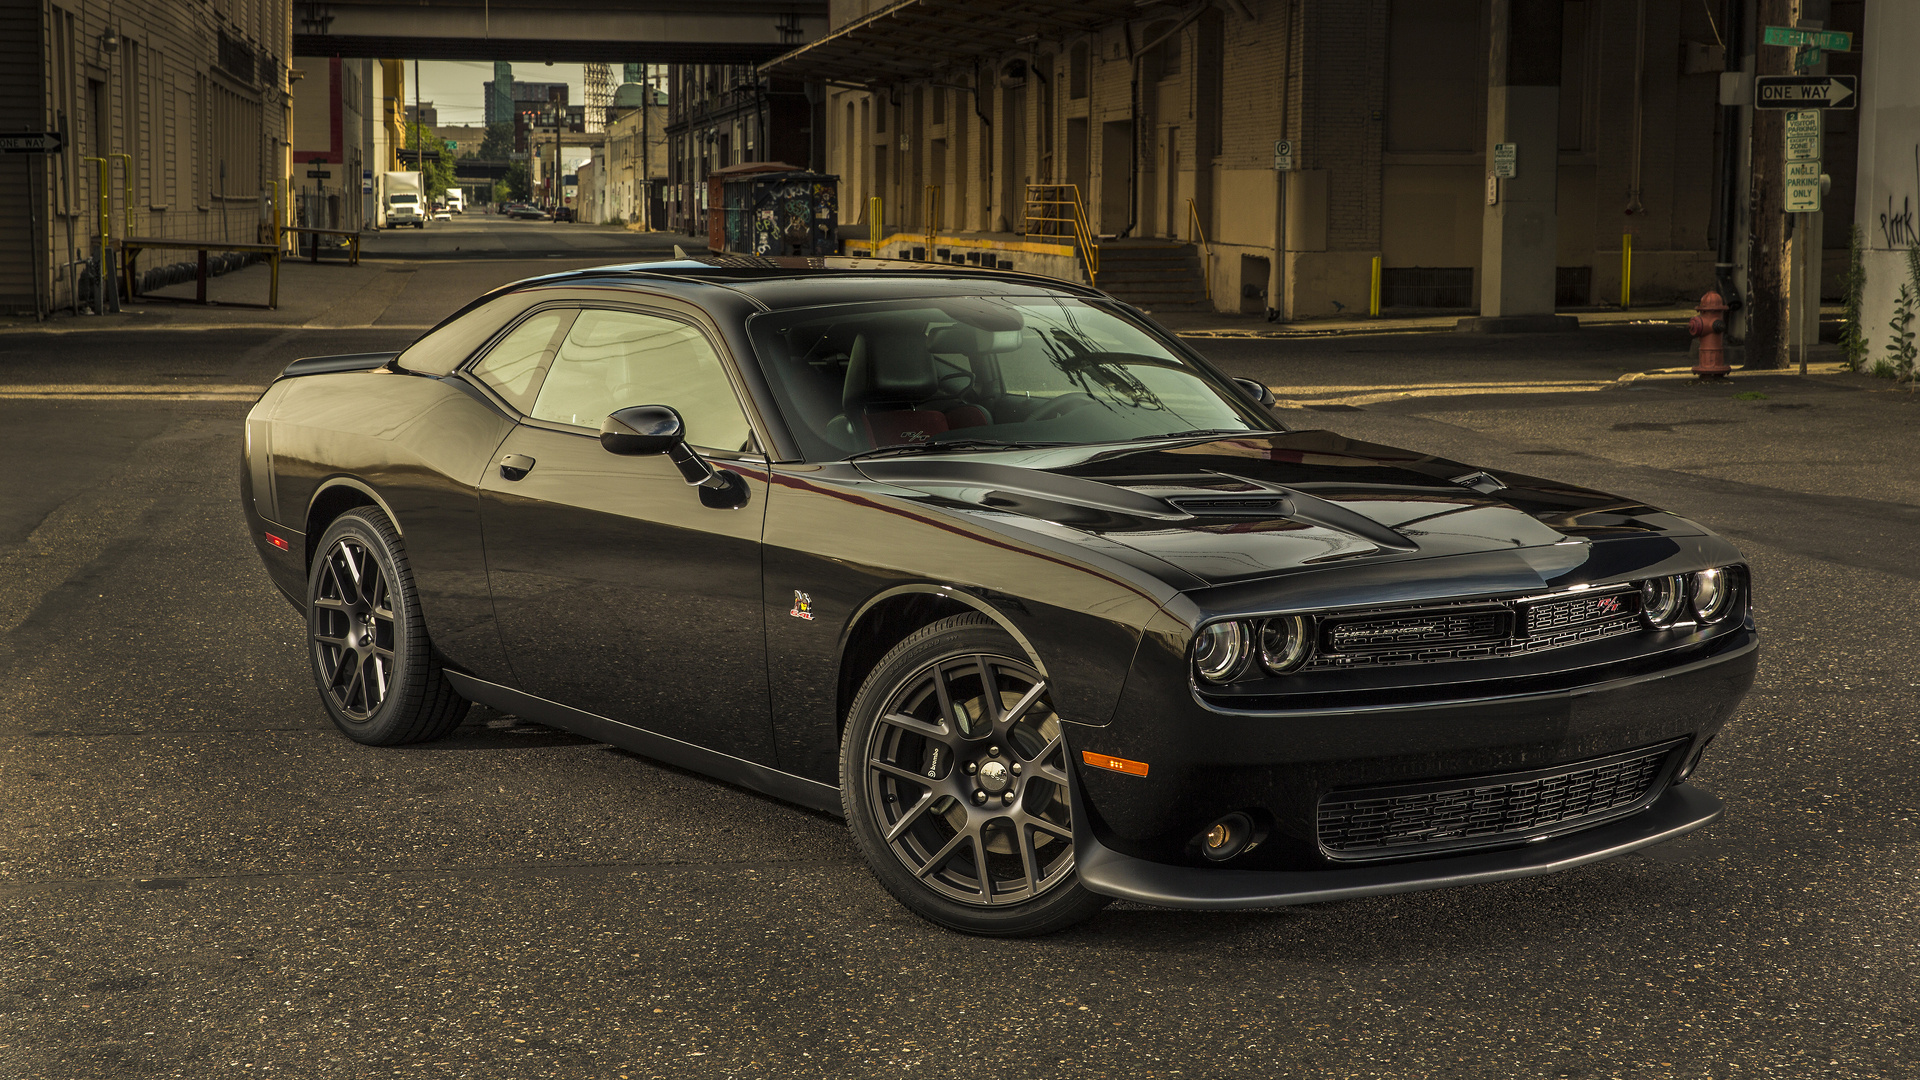 Dodge Challenger, Sports car, News and tests, High performance, 1920x1080 Full HD Desktop